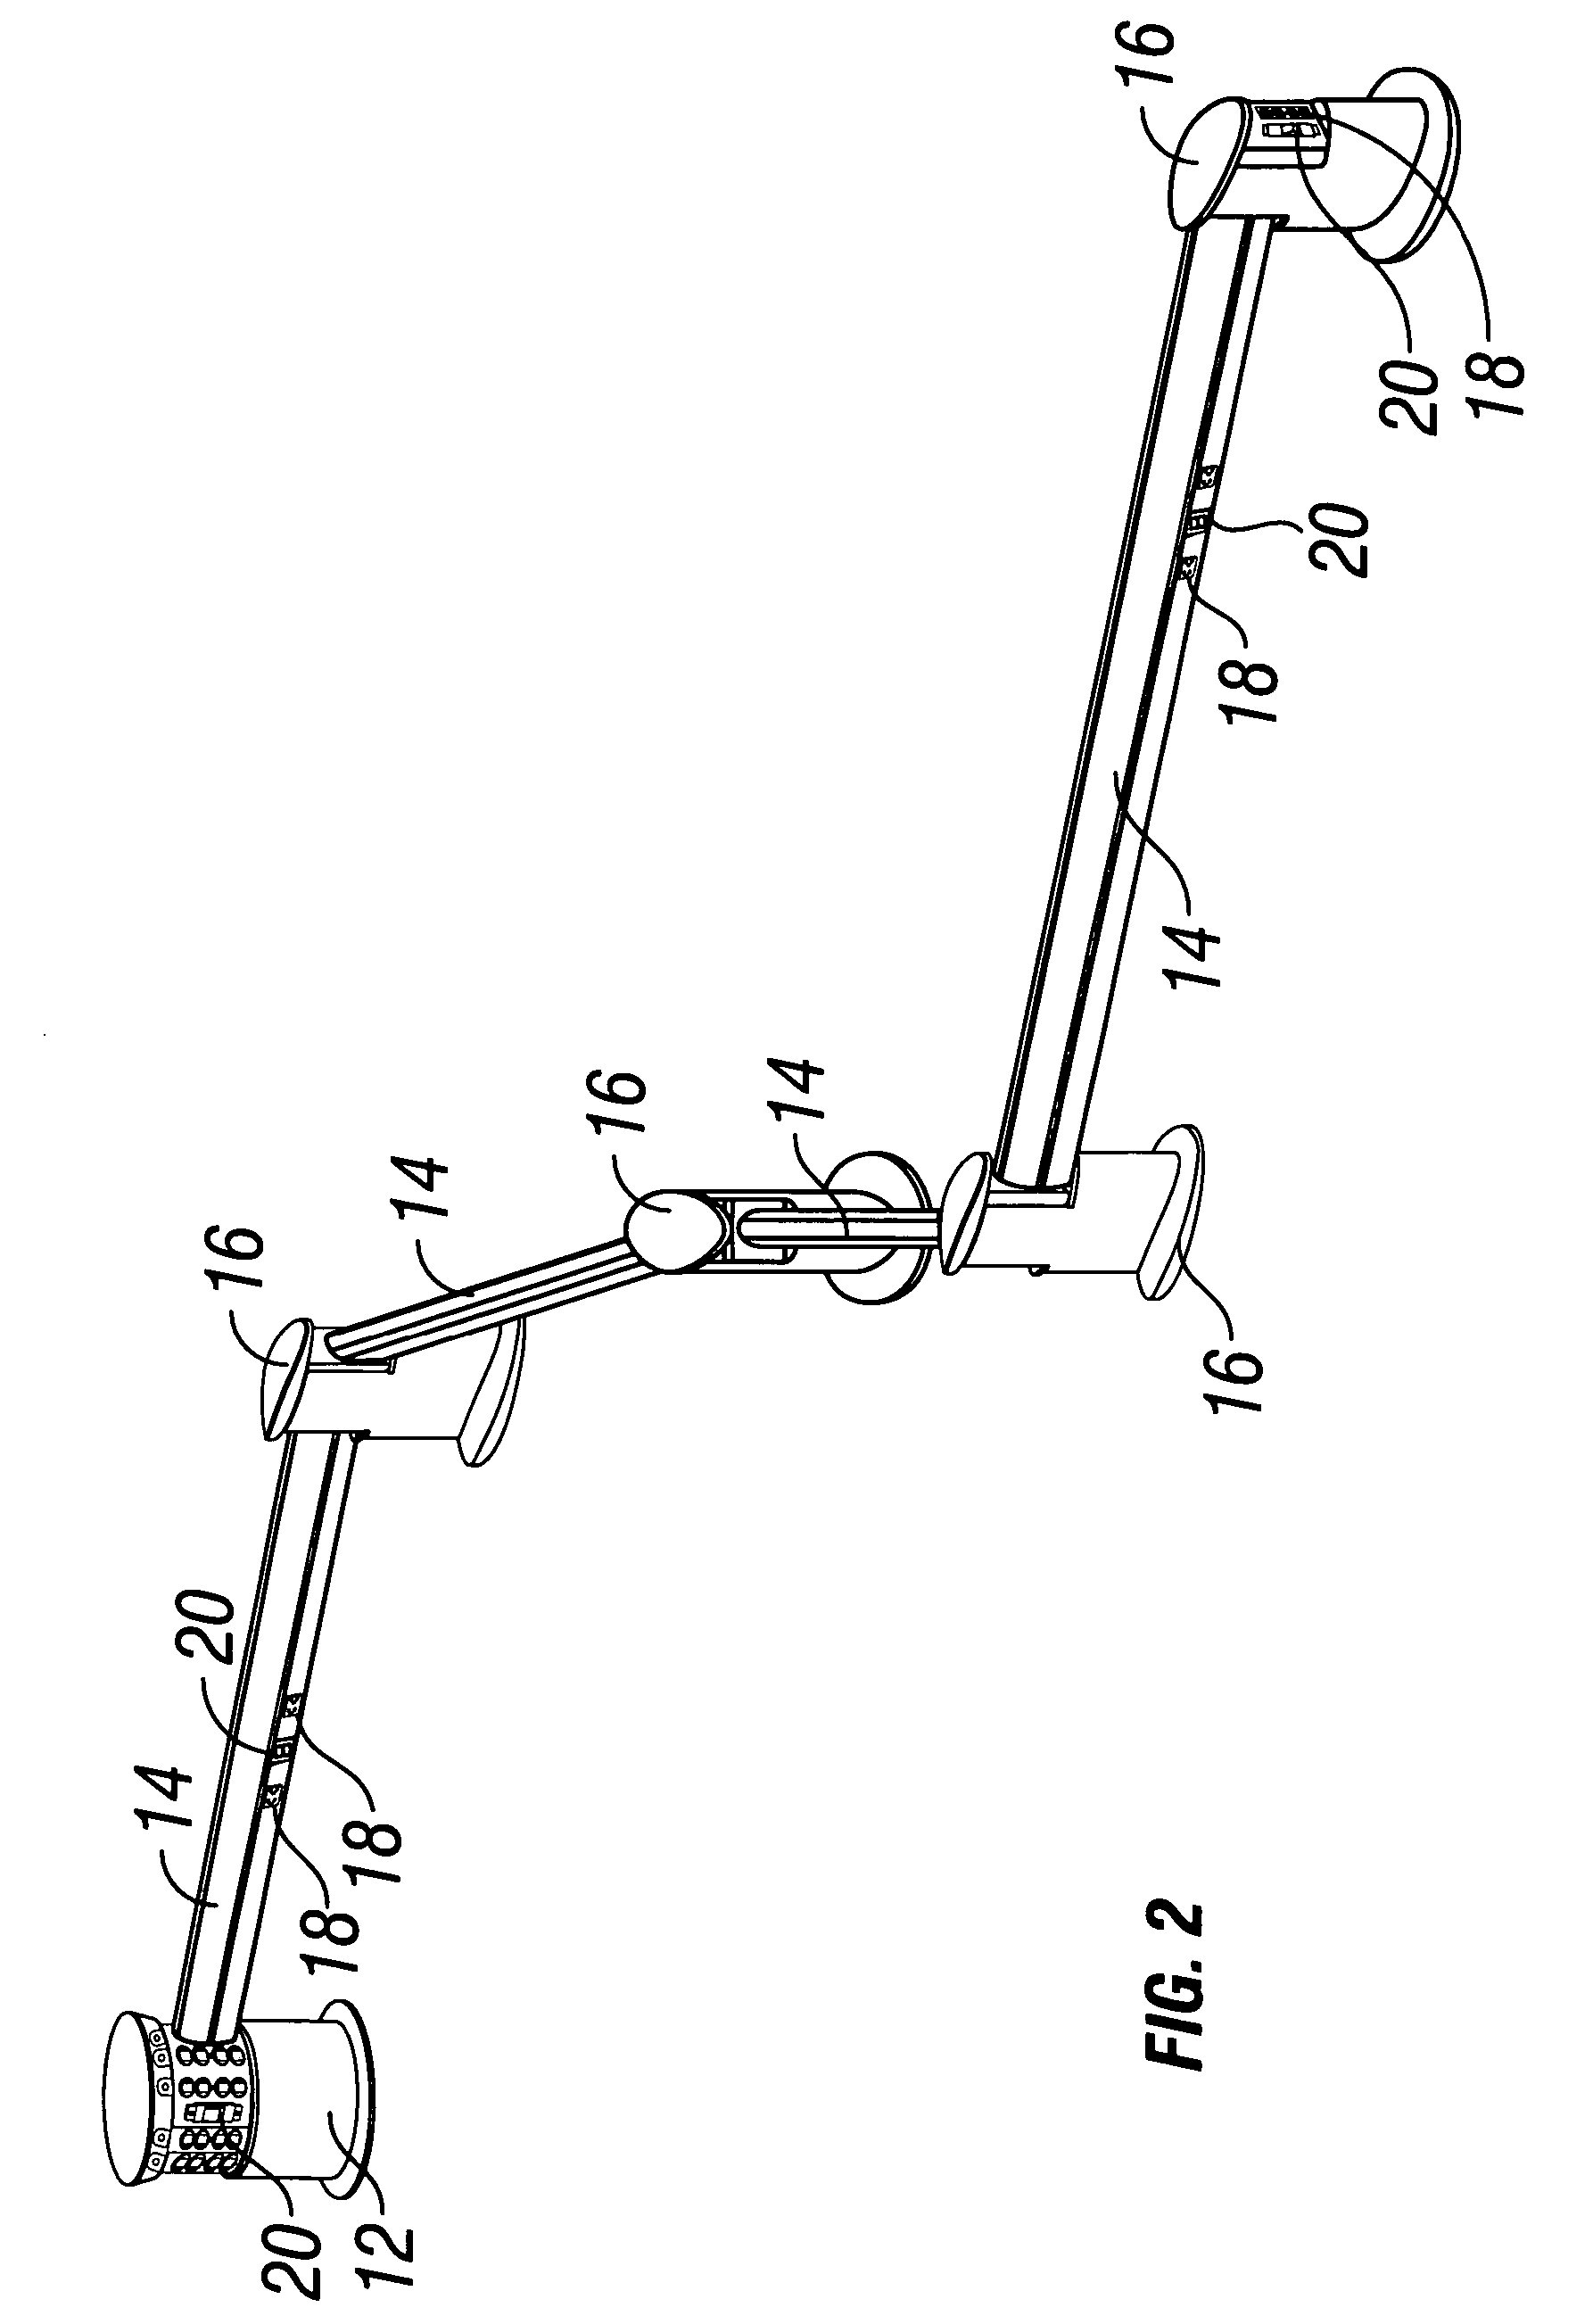 Modular system of power and data delivery components and method of setting up and utilizing the components in a work space environment